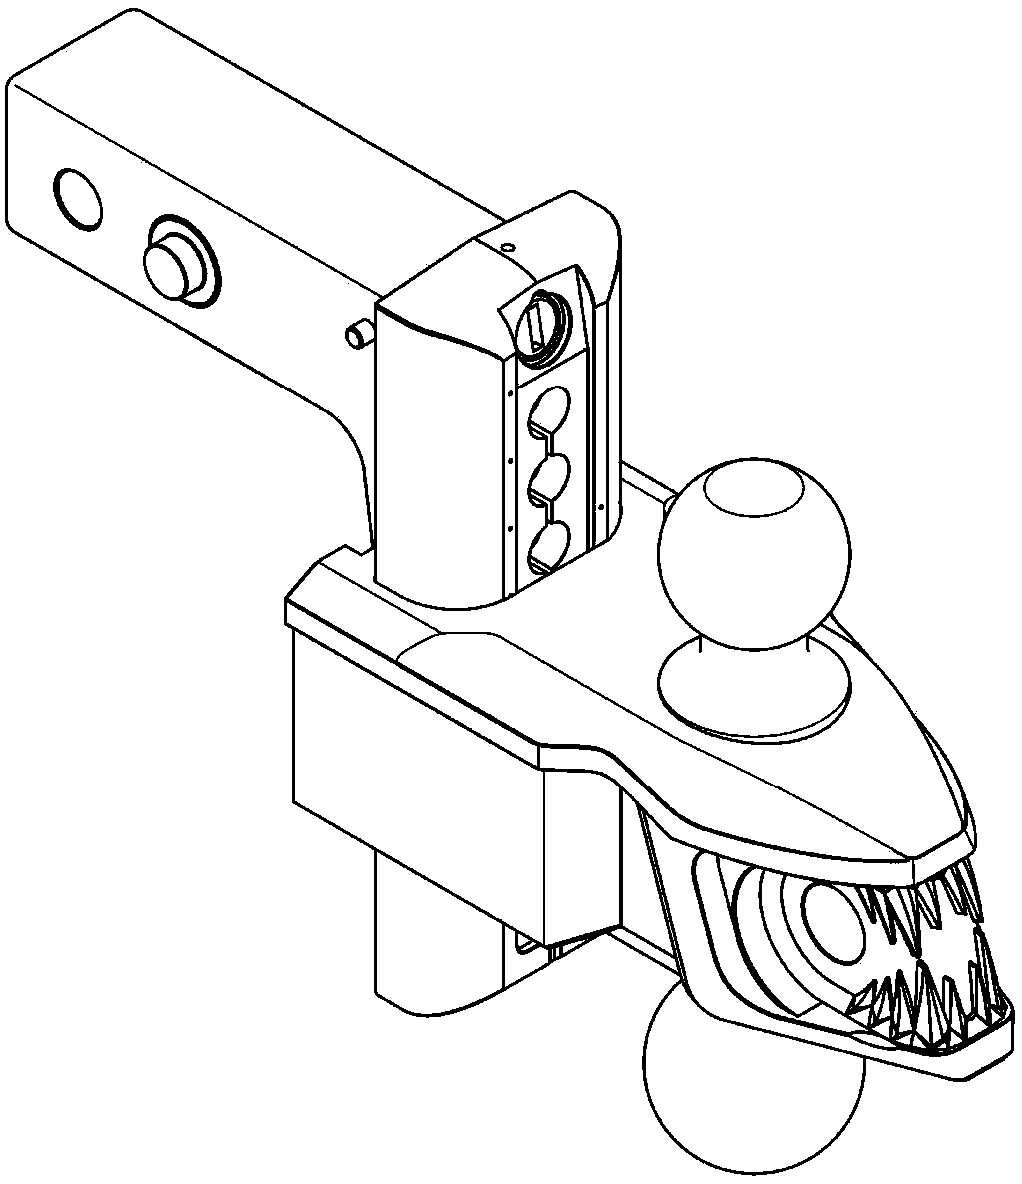 A trailer arm assembly